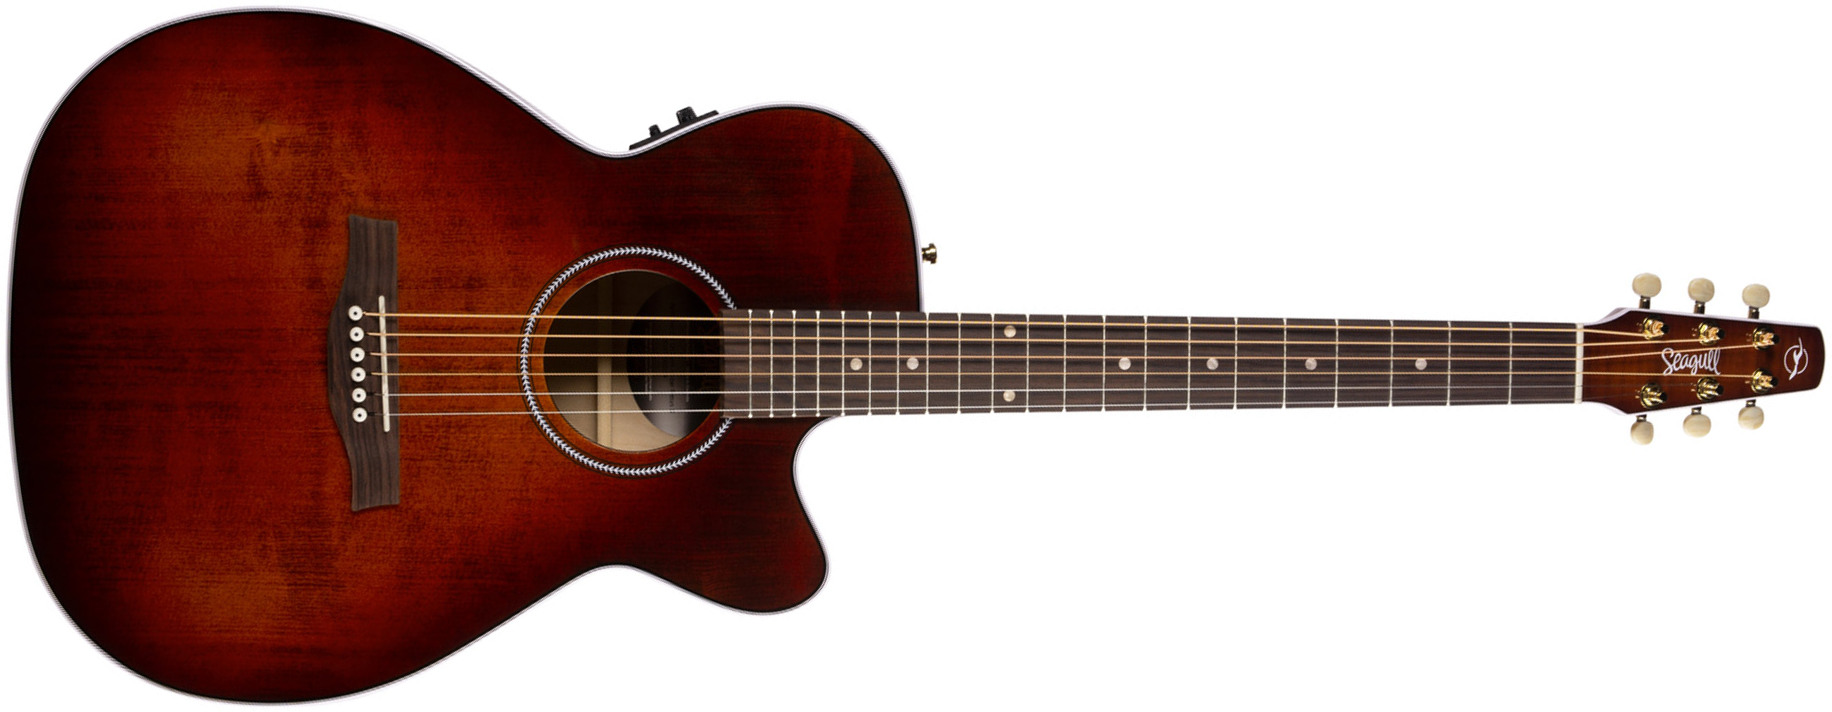 Seagull Performer Flame Maple Presys Ii Concert Hall Cw Epicea Erable Rw - Burst Umber - Electro acoustic guitar - Main picture